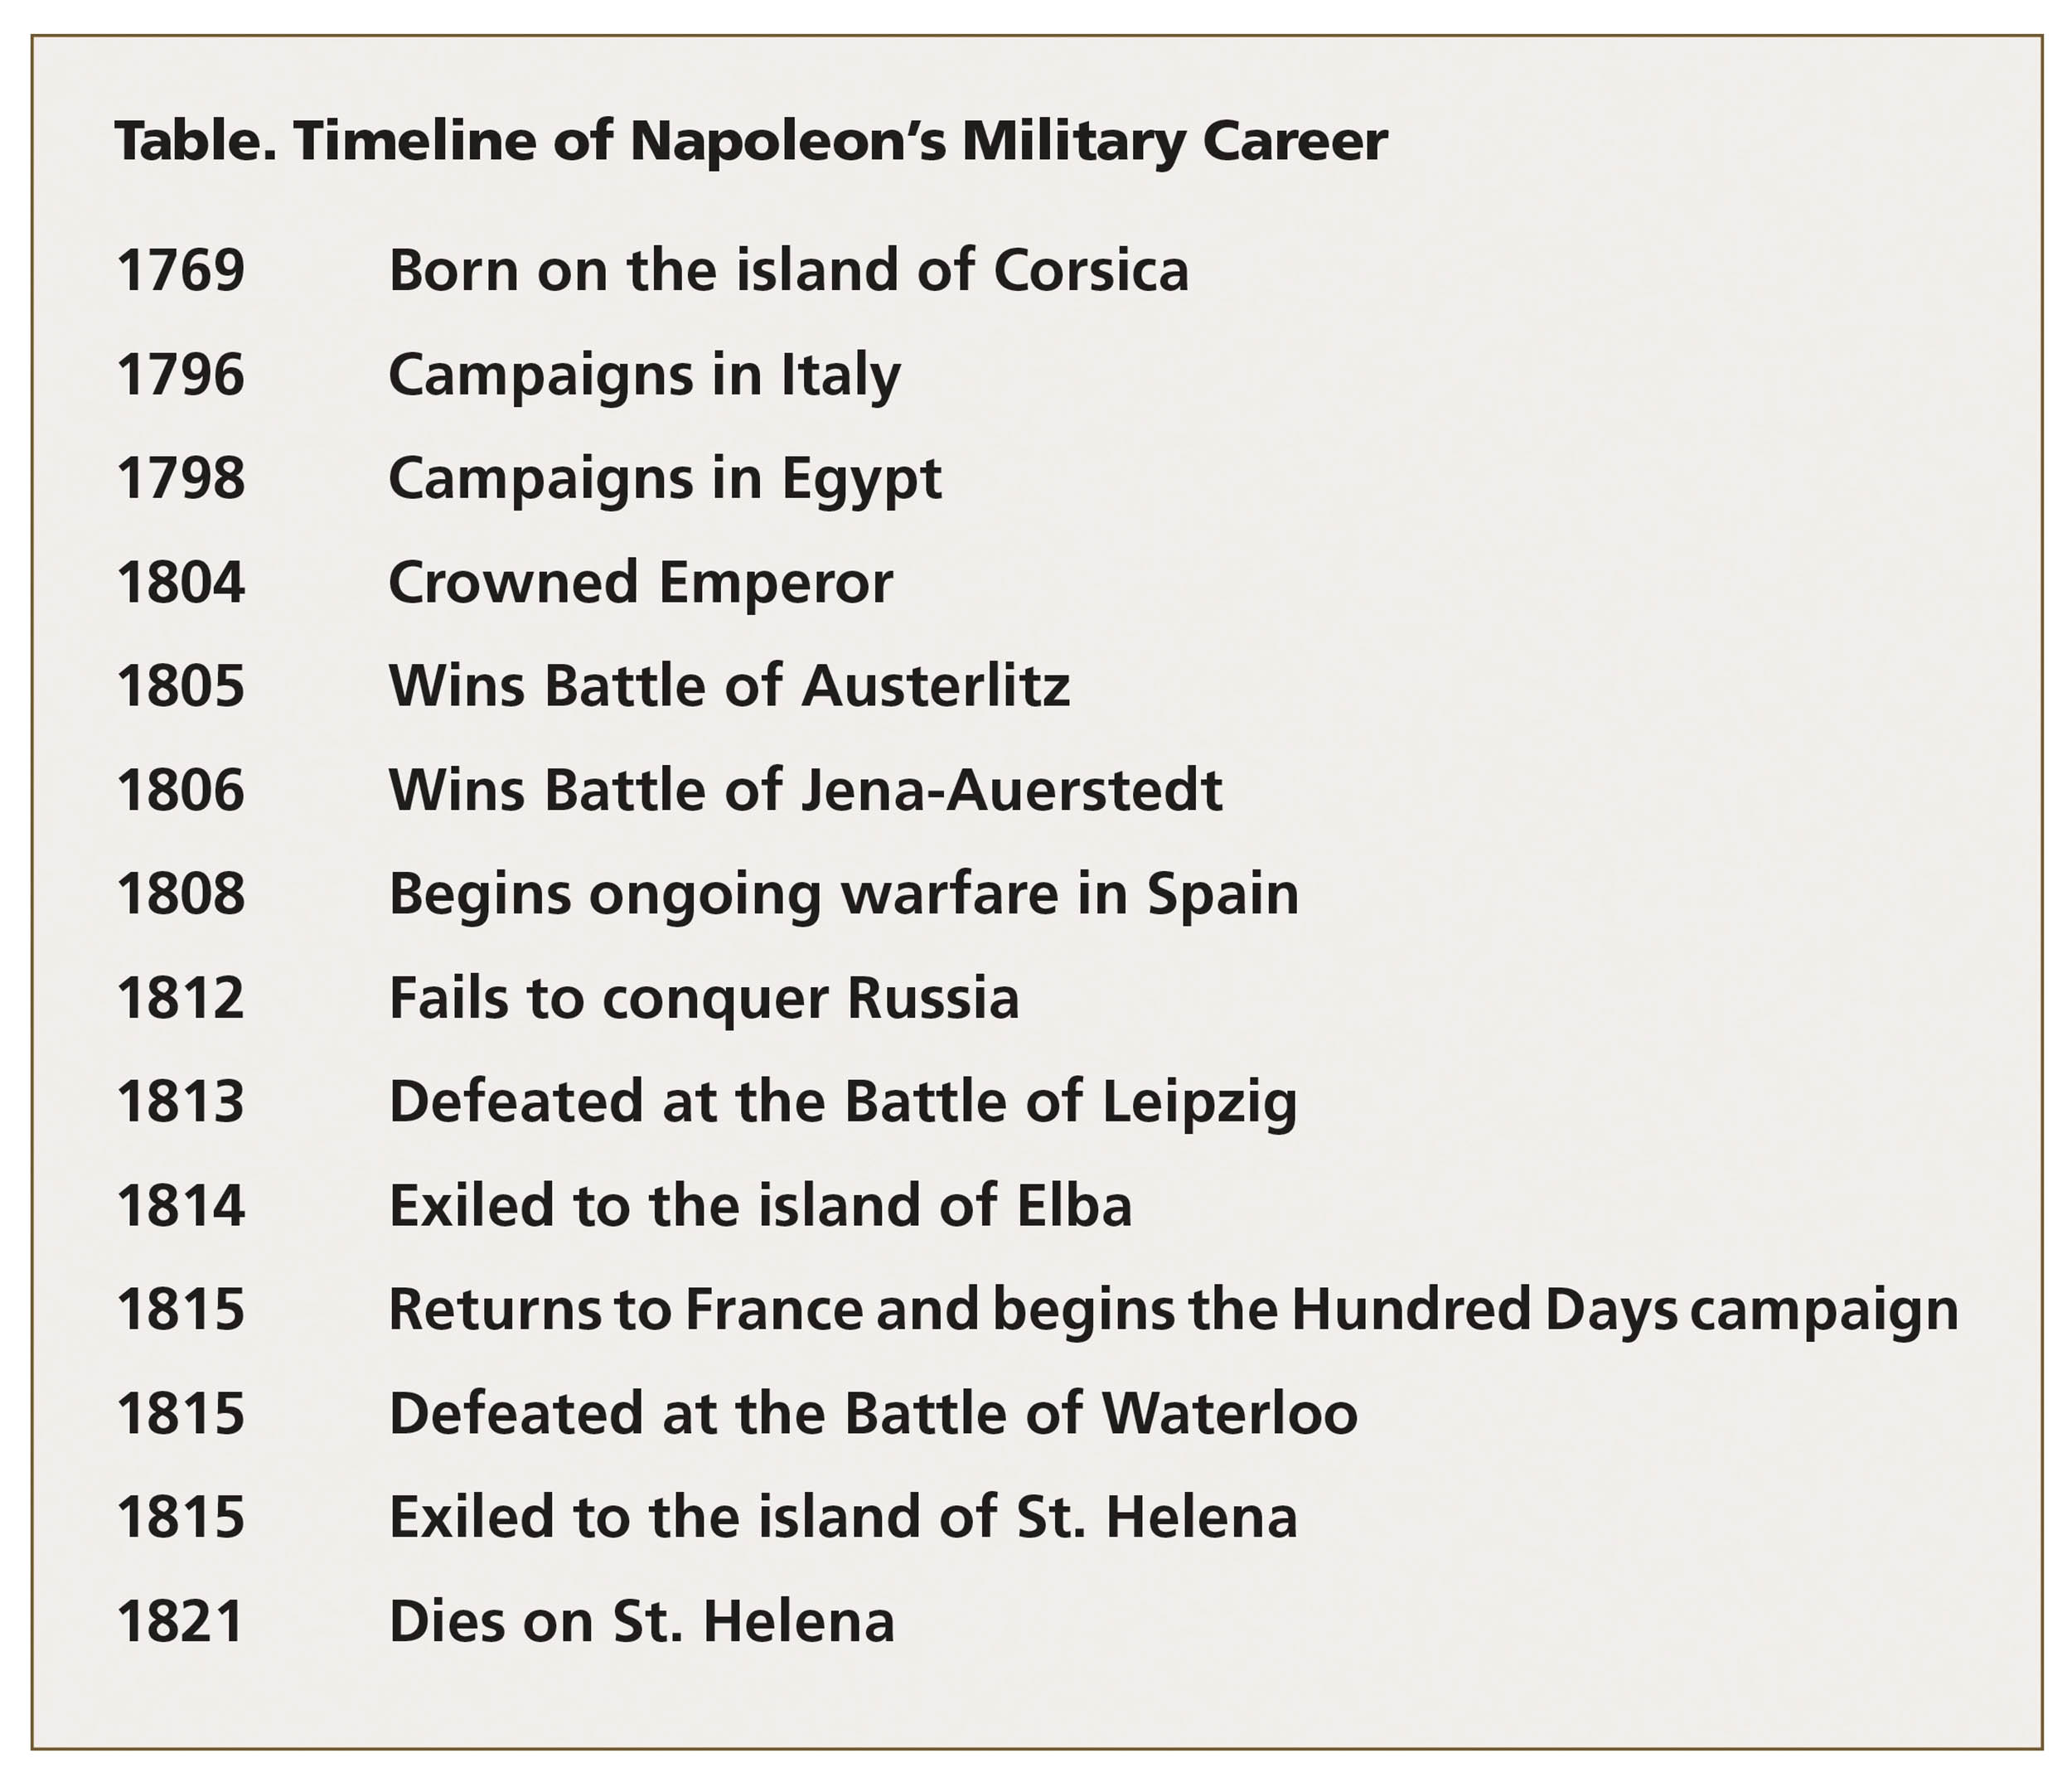 Table. Timeline of Napoleon’s Military Career